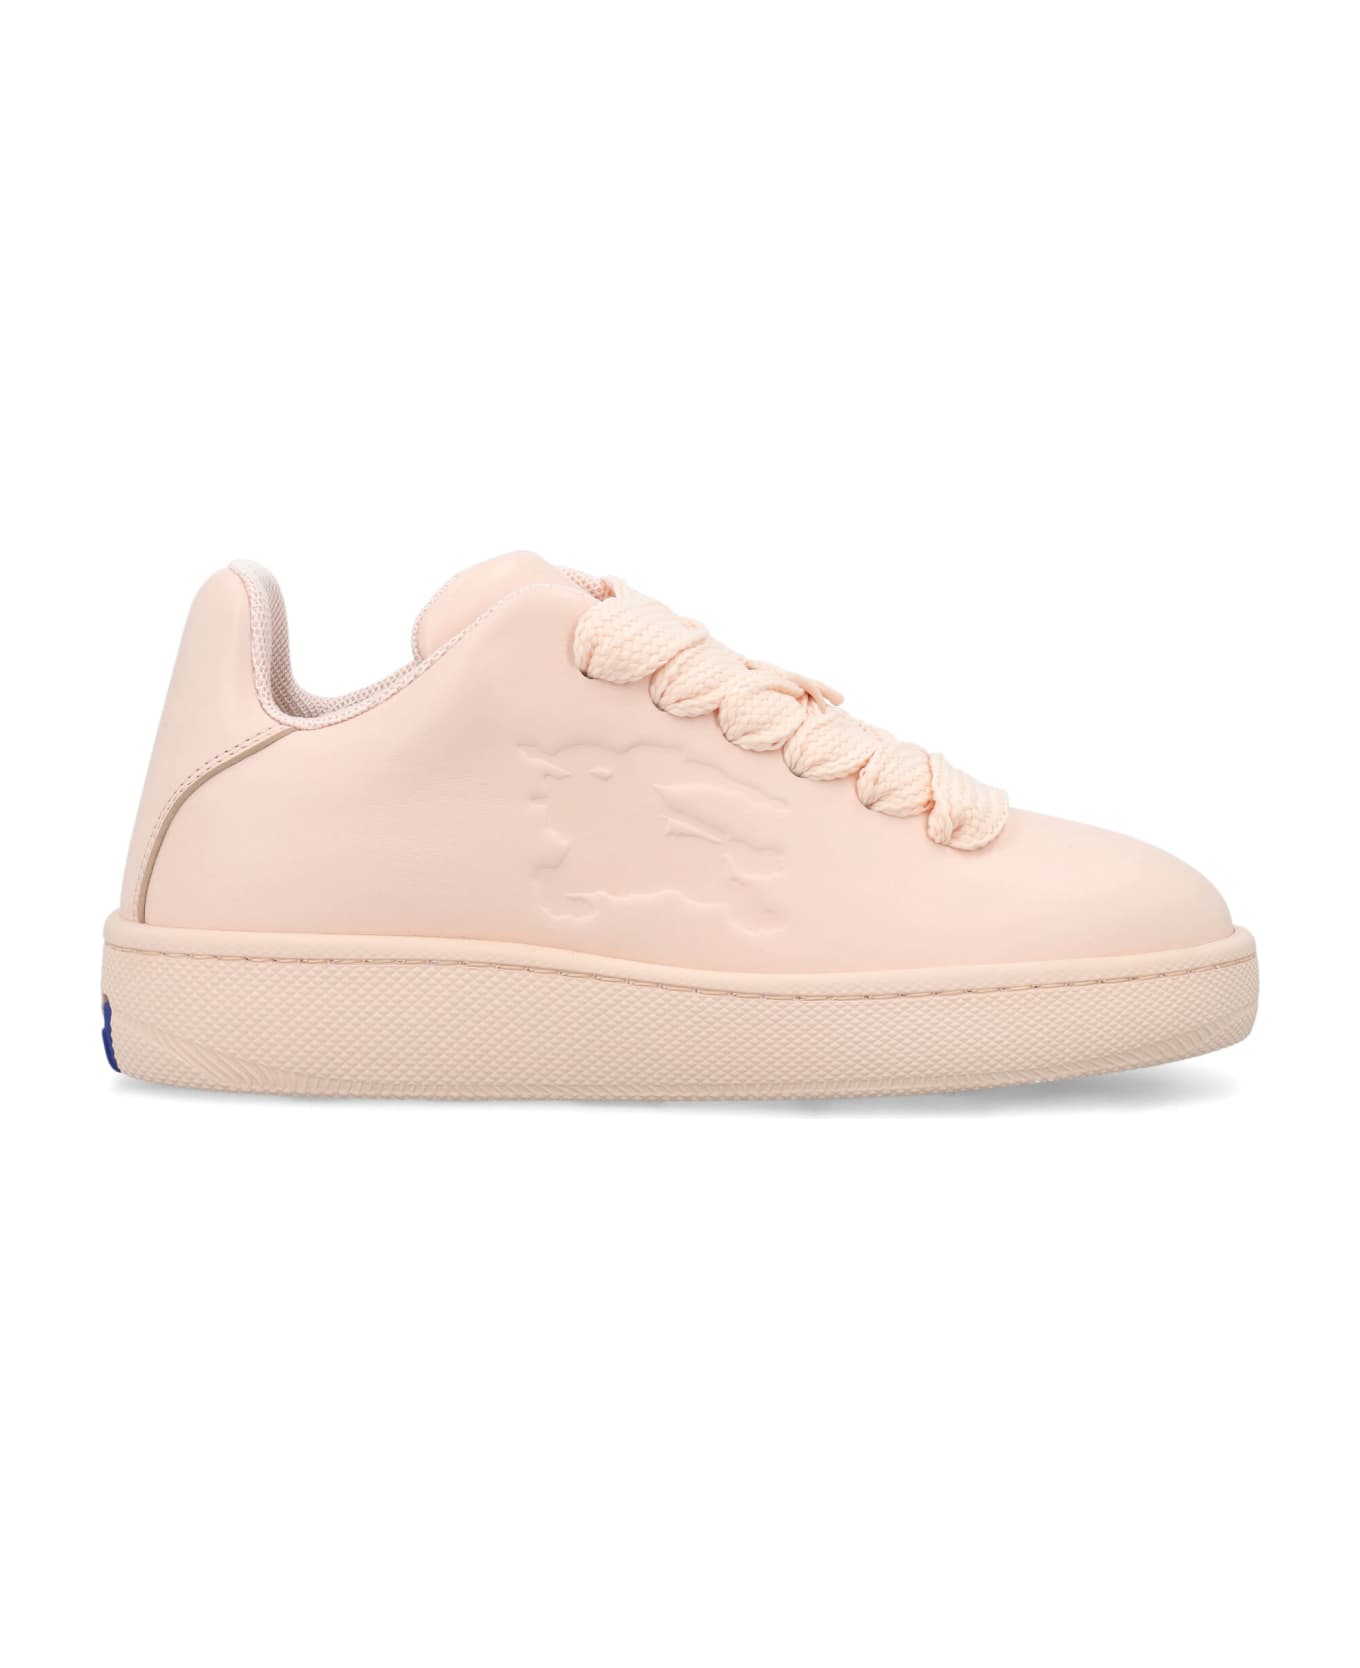 Burberry London Leather Box Sneakers - BABY NEON